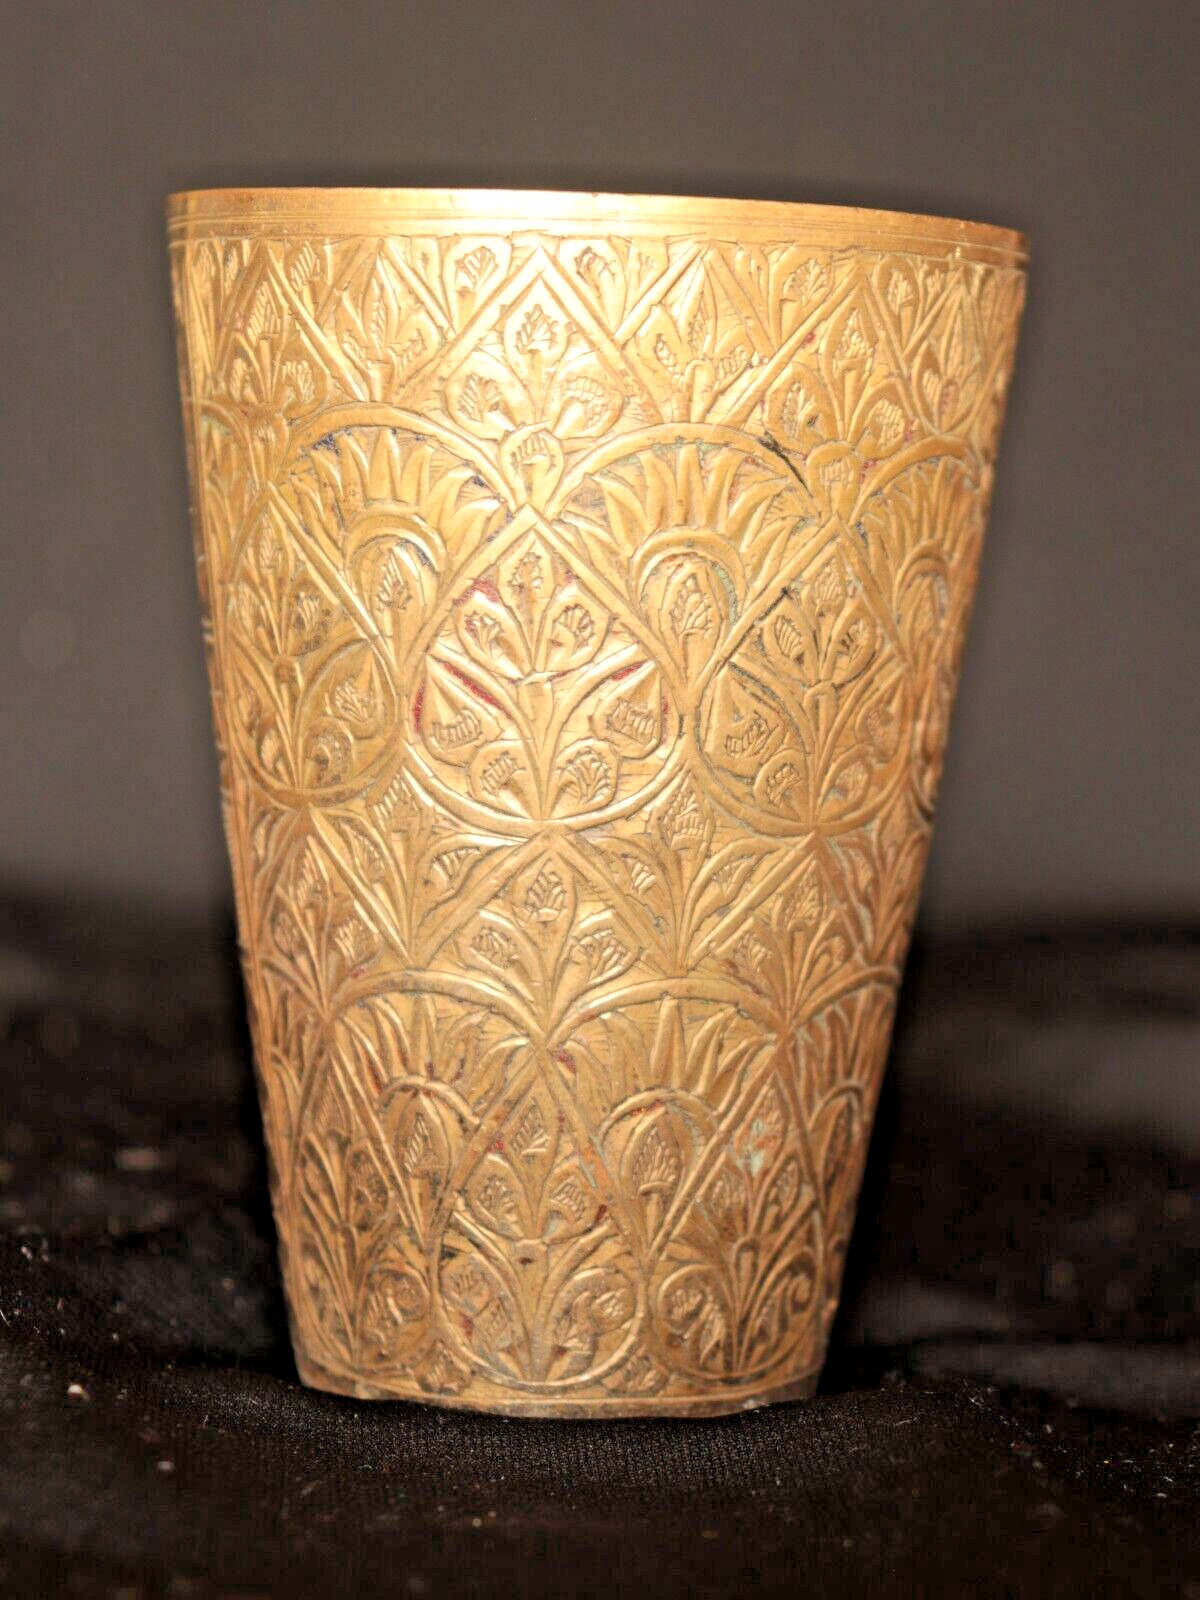 Hand-Embossed Ottoman Islamic Arabic Calligraphy & Floral, Antique Brass Cup